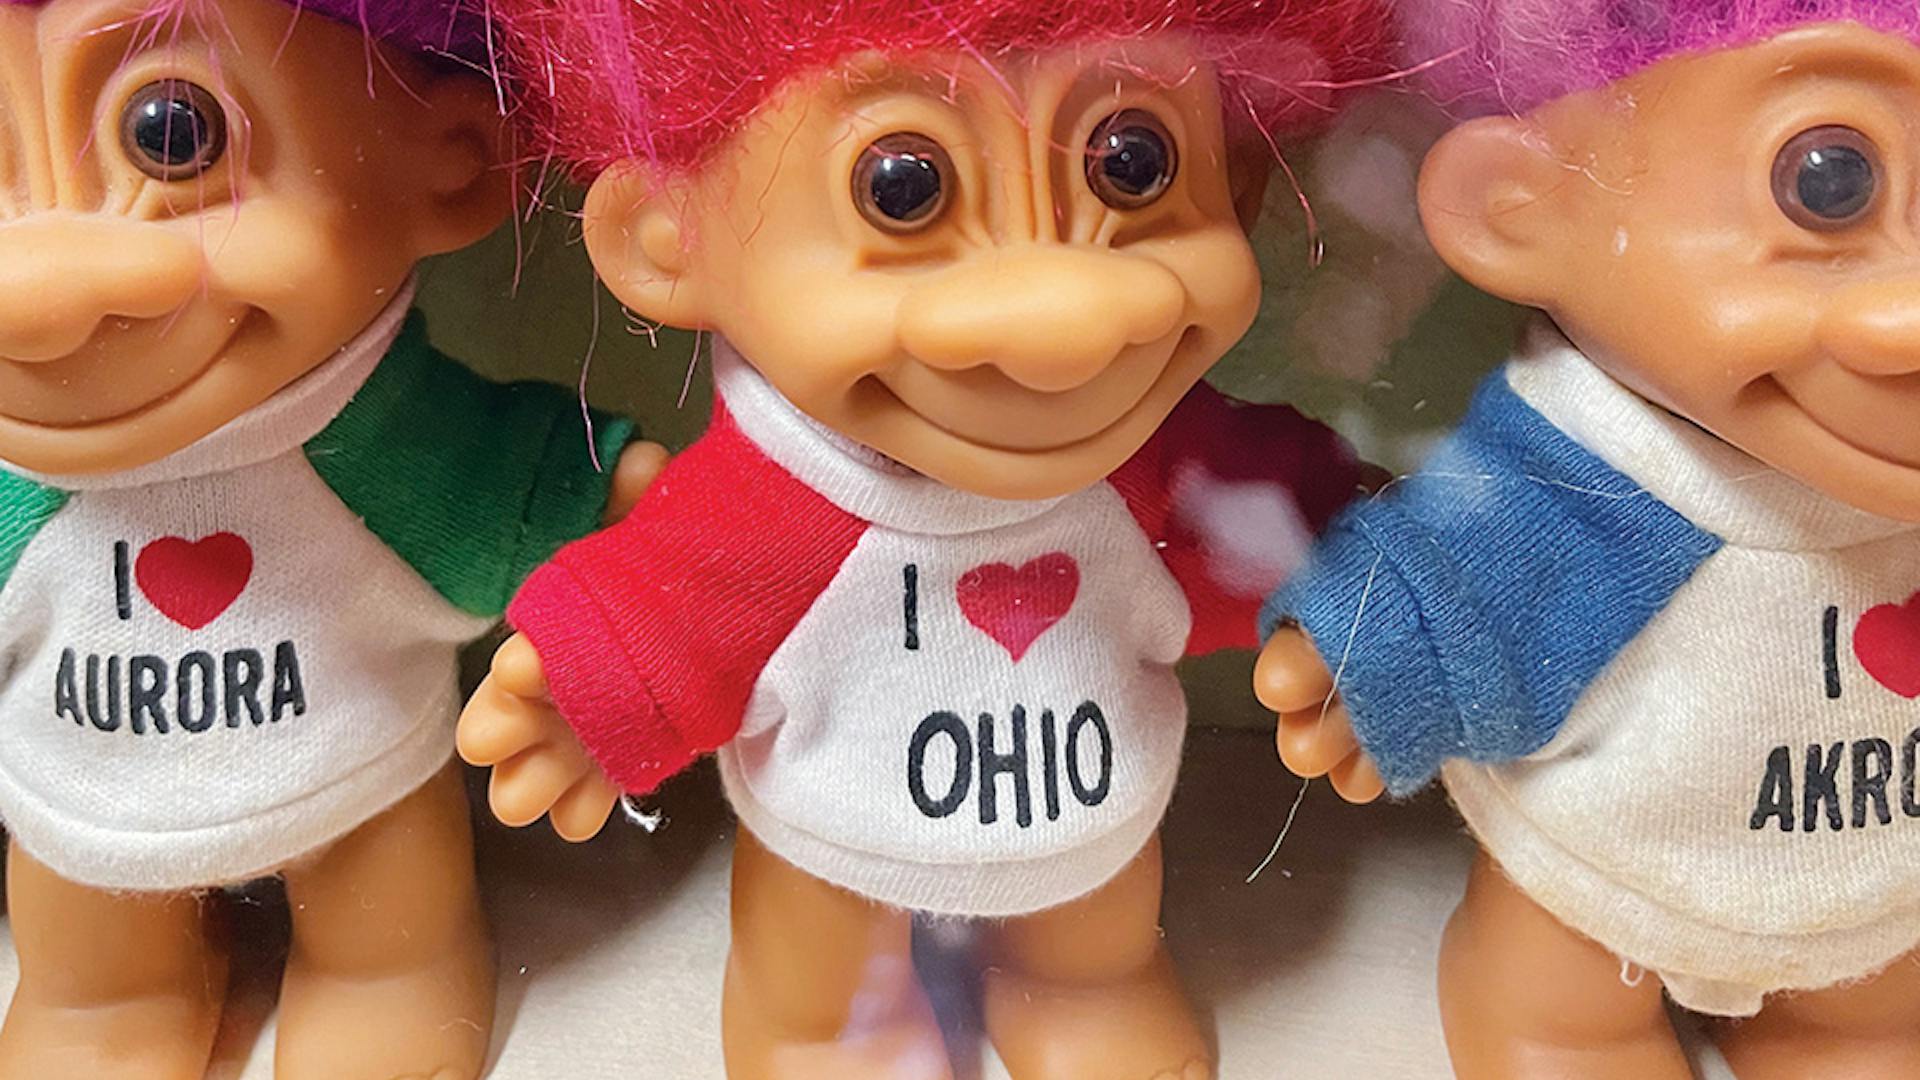 Troll wearing “I Love Ohio” shirt at The Troll Hole Museum in Alliance, Ohio (photo by Jim Vickers)